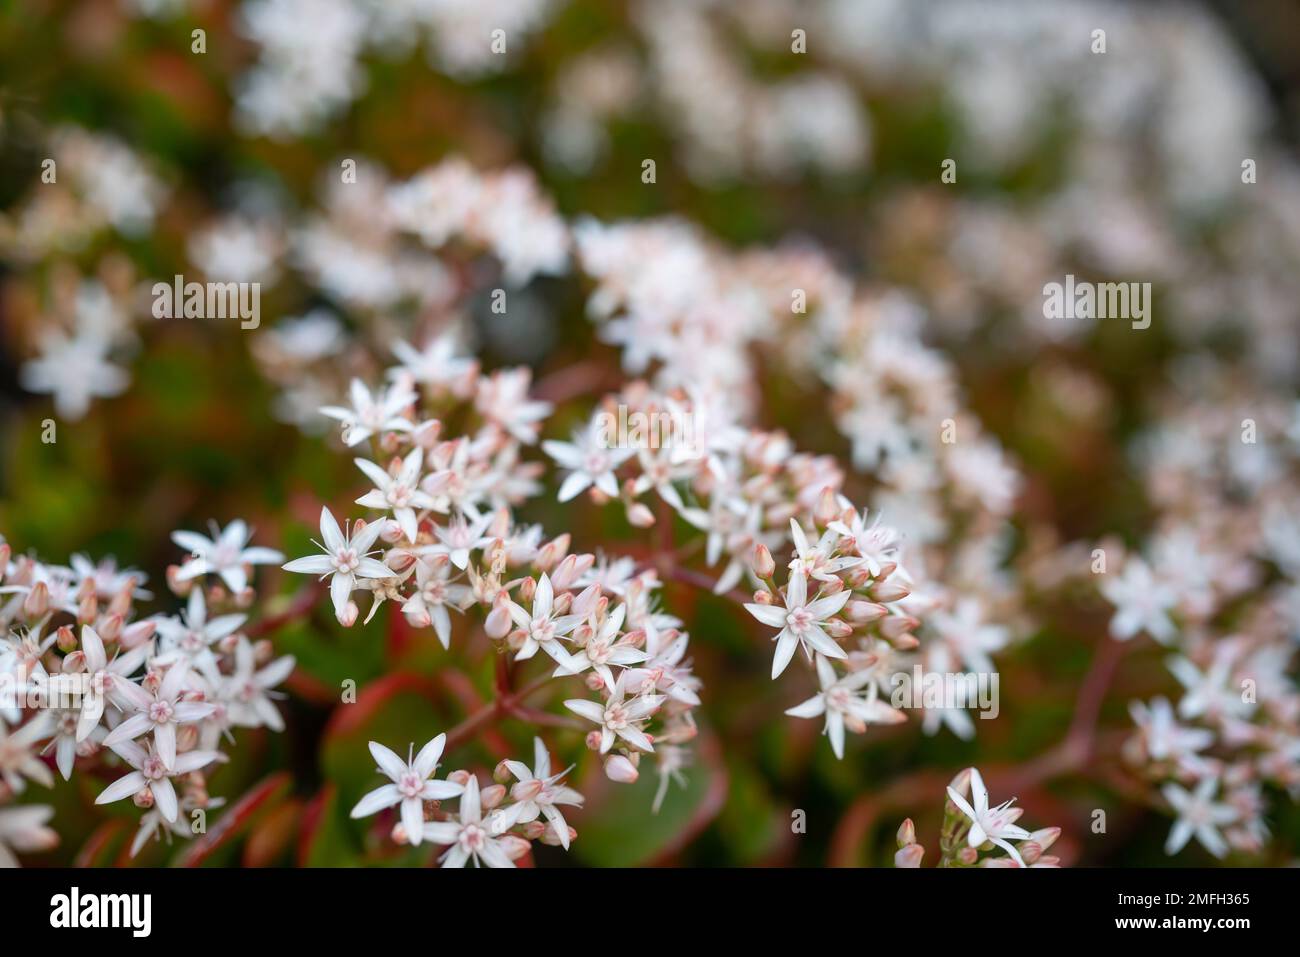 White flowers of Jade plant. Red edges of green leaves Stock Photo